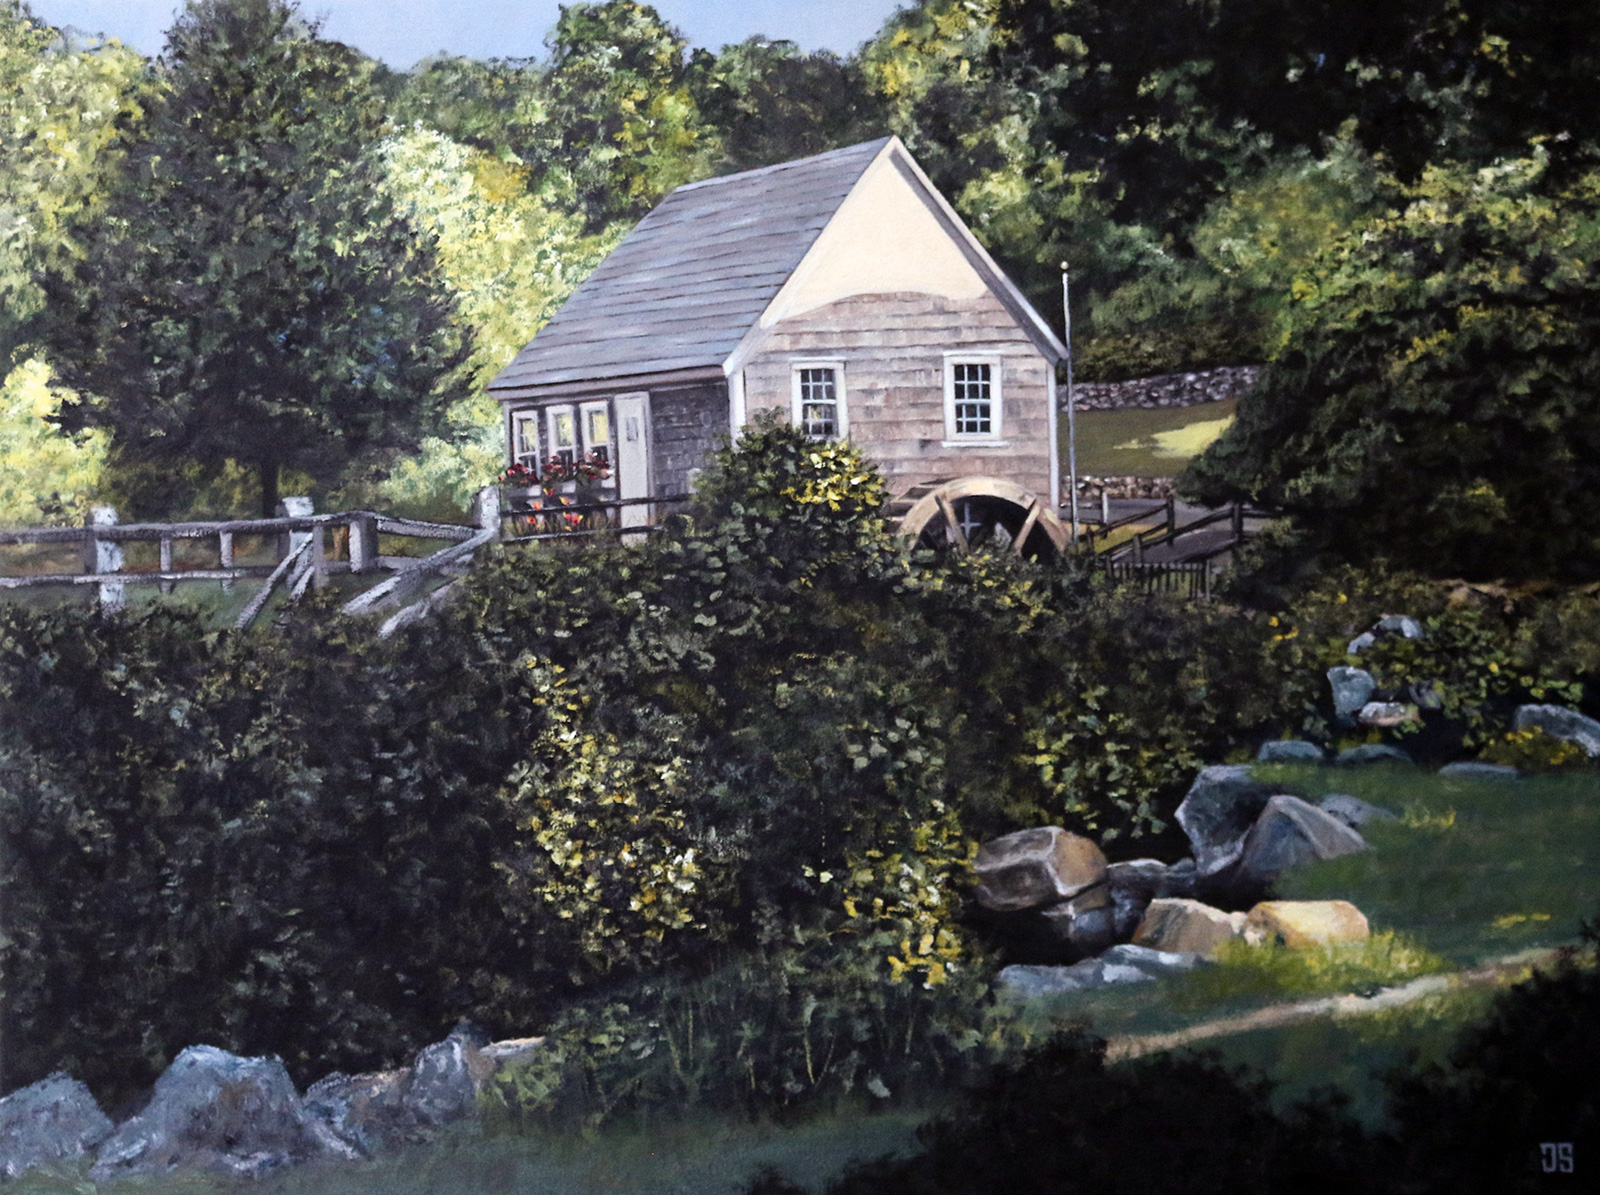 Oil painting "Stony Brook Grist Mill, Brewster" by Jeffrey Dale Starr